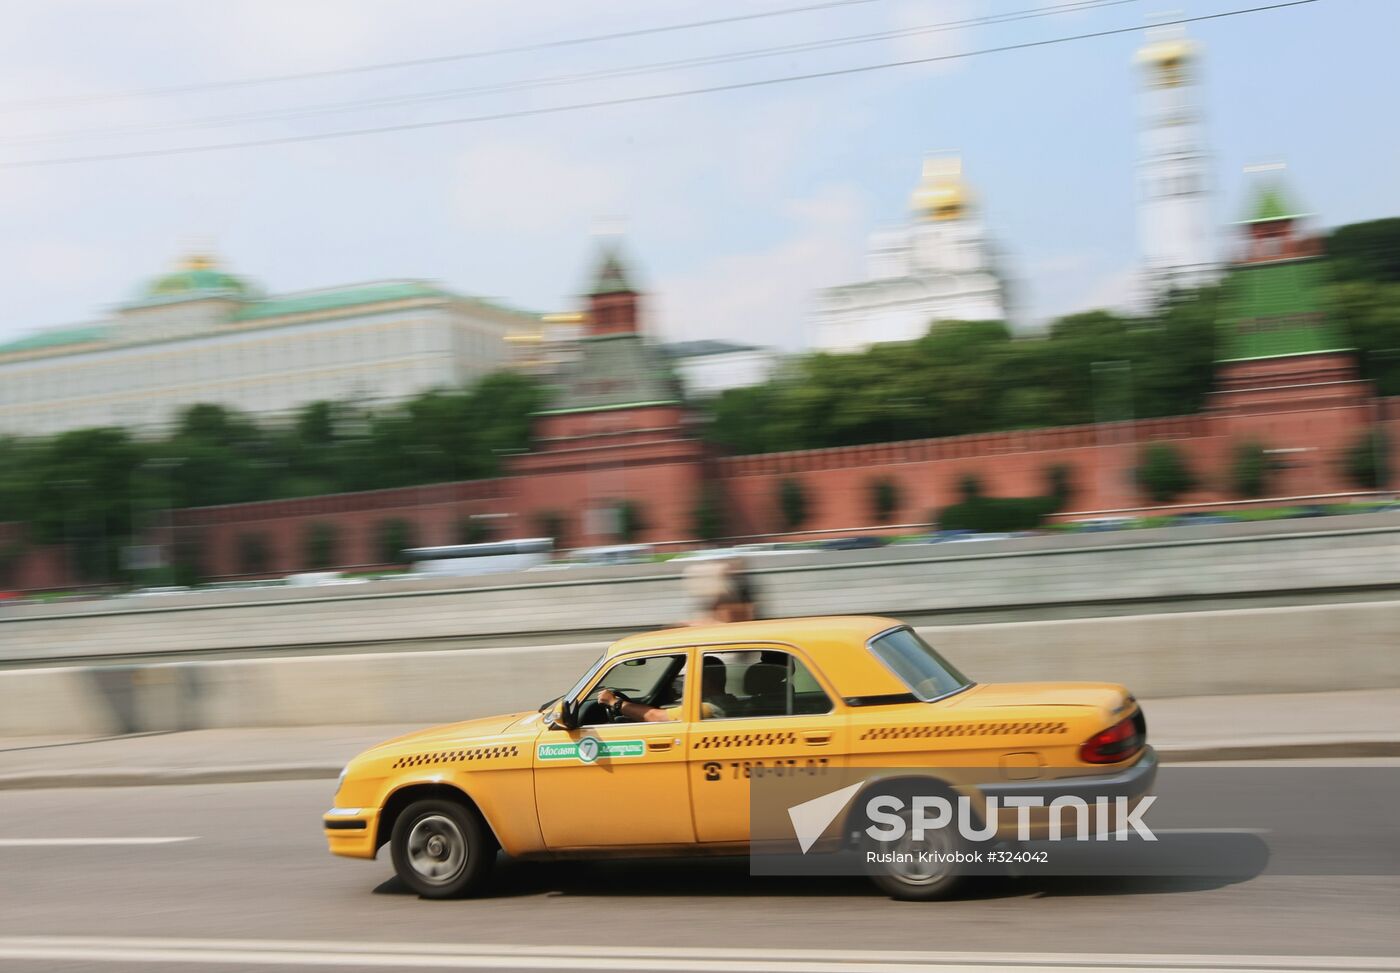 Taxi in Moscow